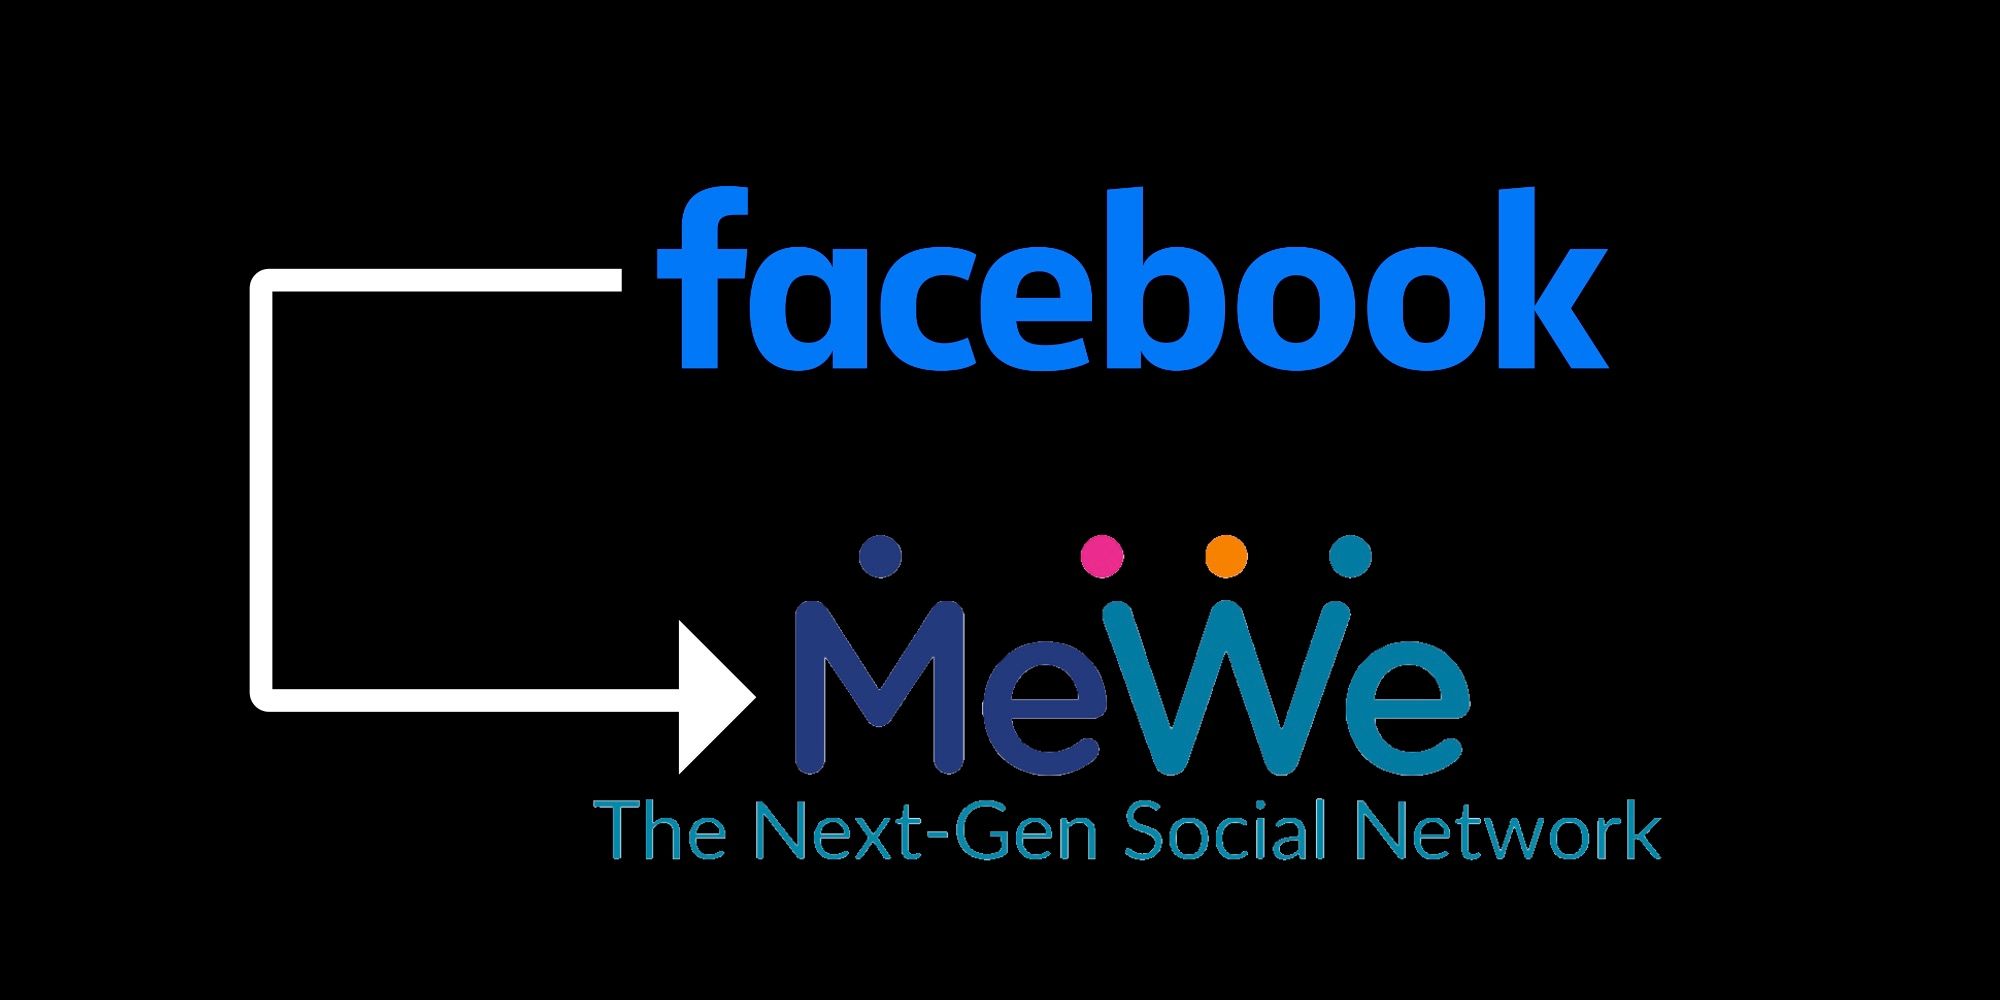 Is building a Facebook alternative worth the effort? MeWe thinks so